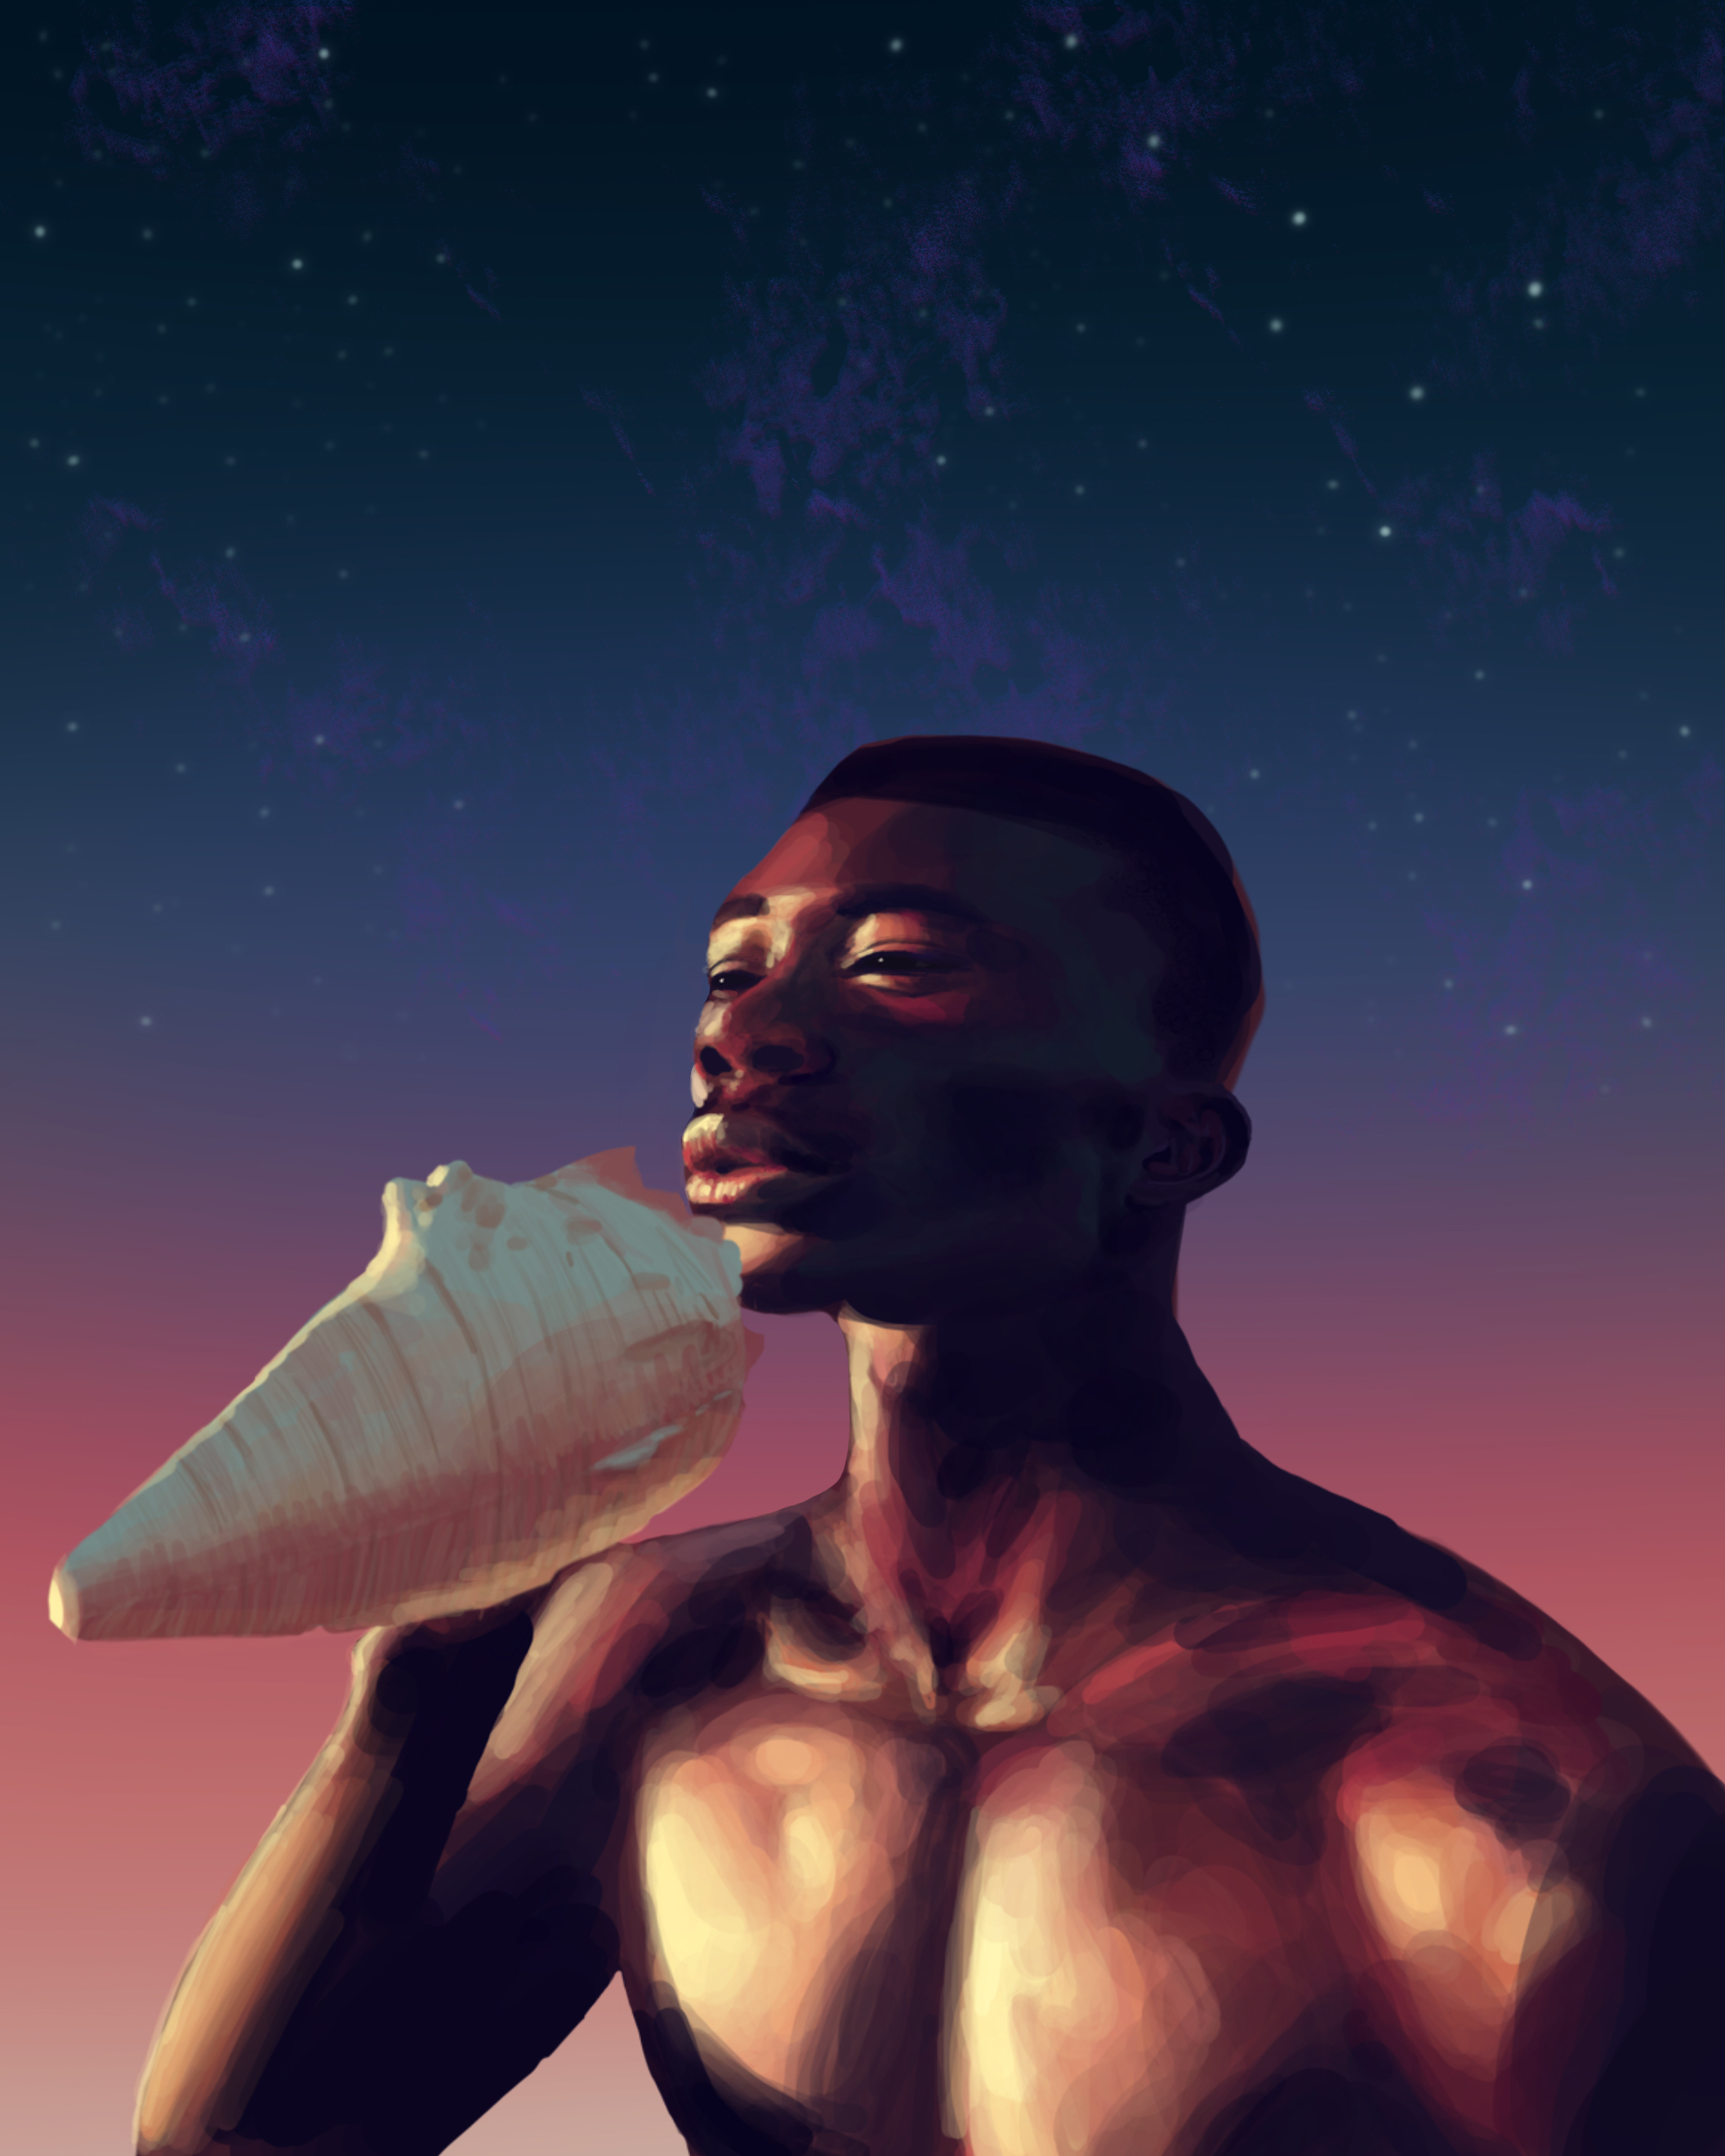 A man in front of a pink, purple, and blue hazy night sky blows air into a big conch shell.